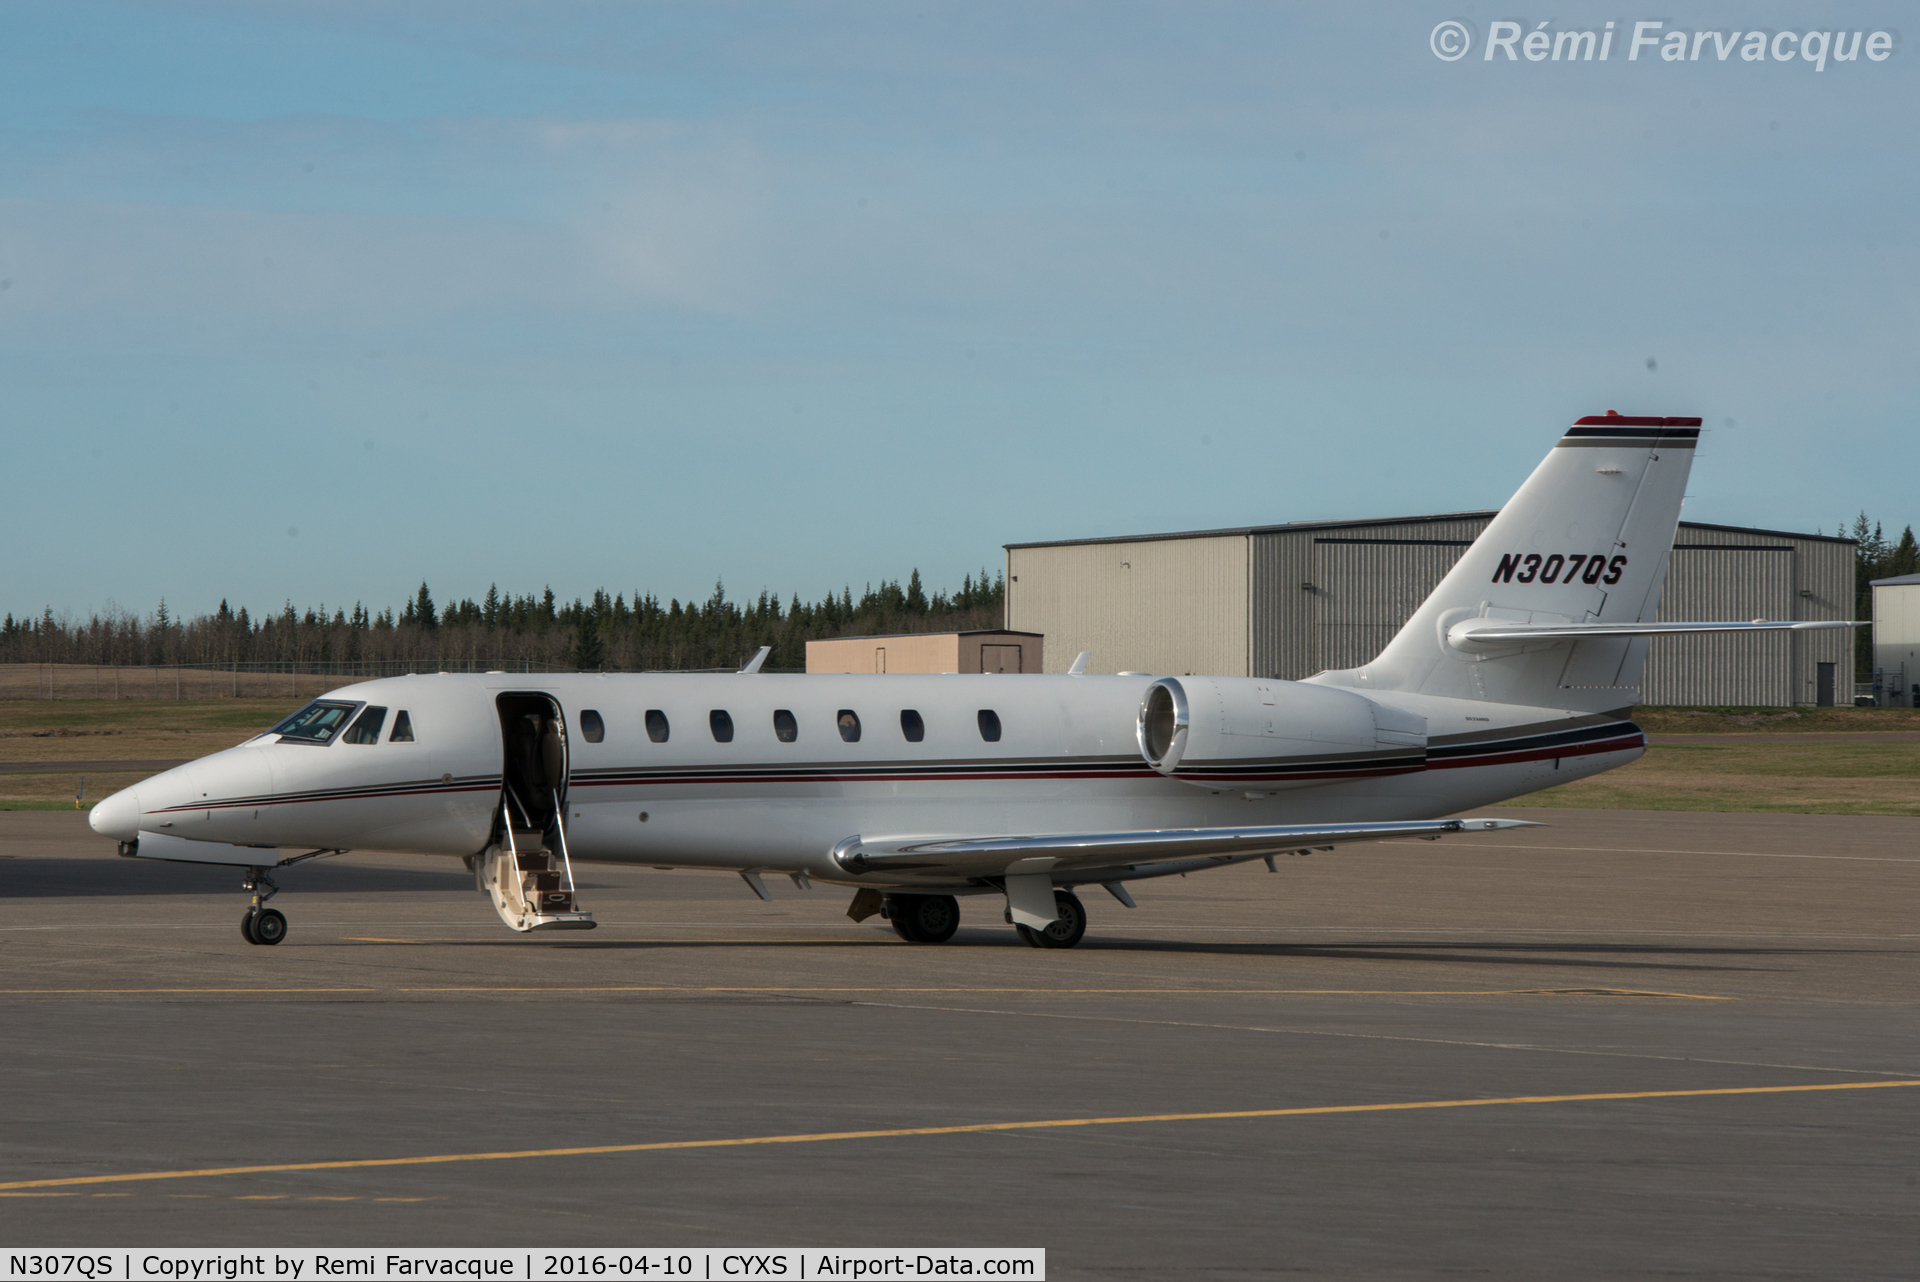 N307QS, 2007 Cessna 680 Citation Sovereign C/N 680-0130, Parked south of main terminal building